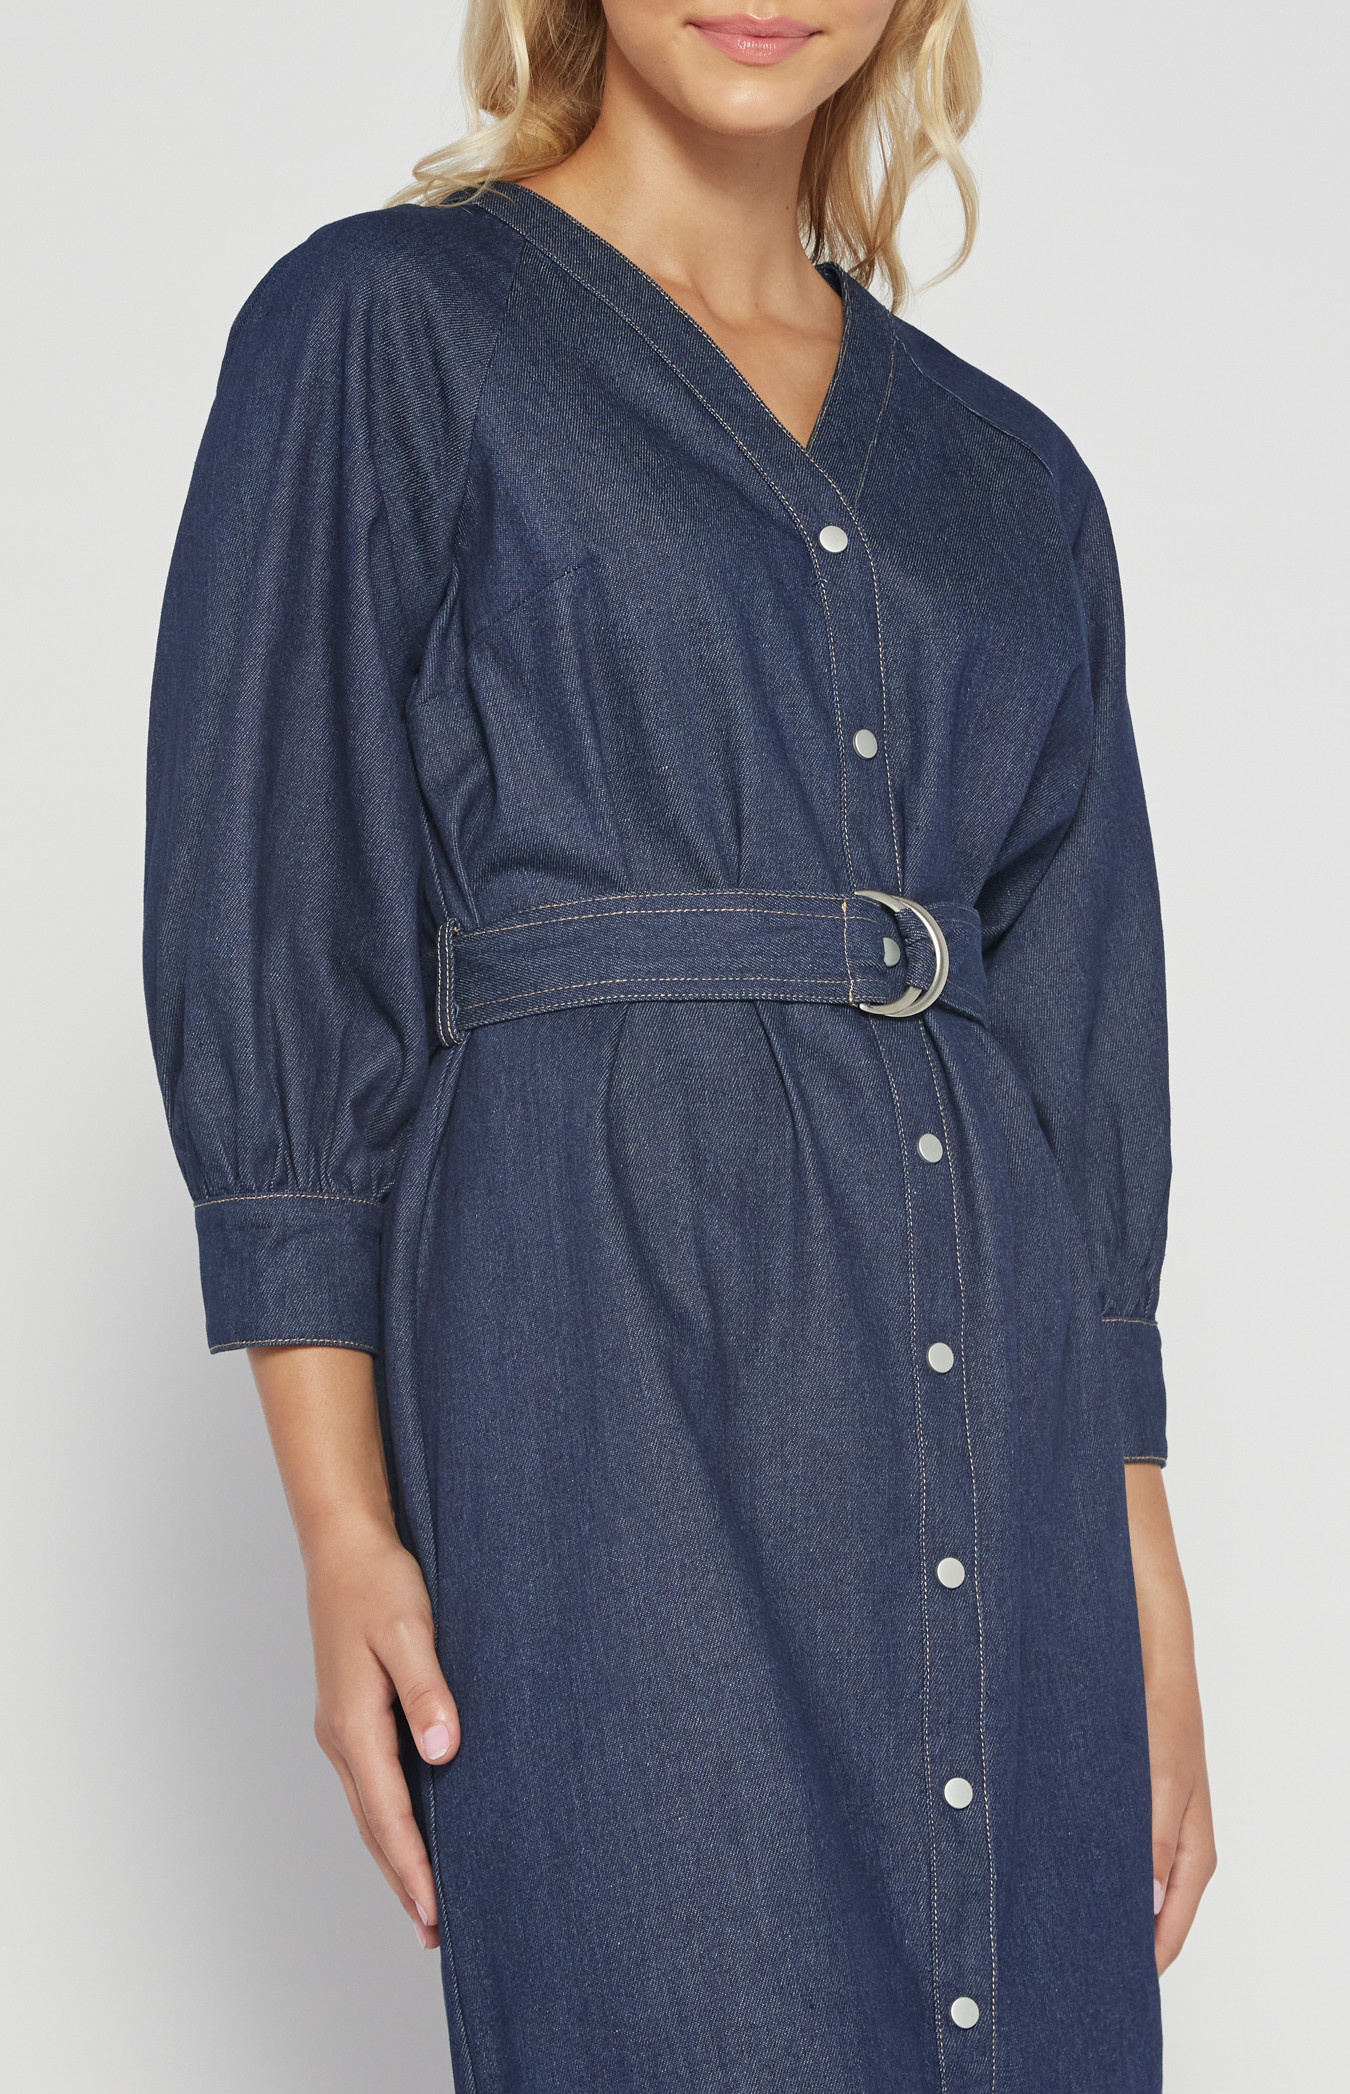 Chambray Button Up Midi Dress with Circle Belt Buckle (SDR1519B)